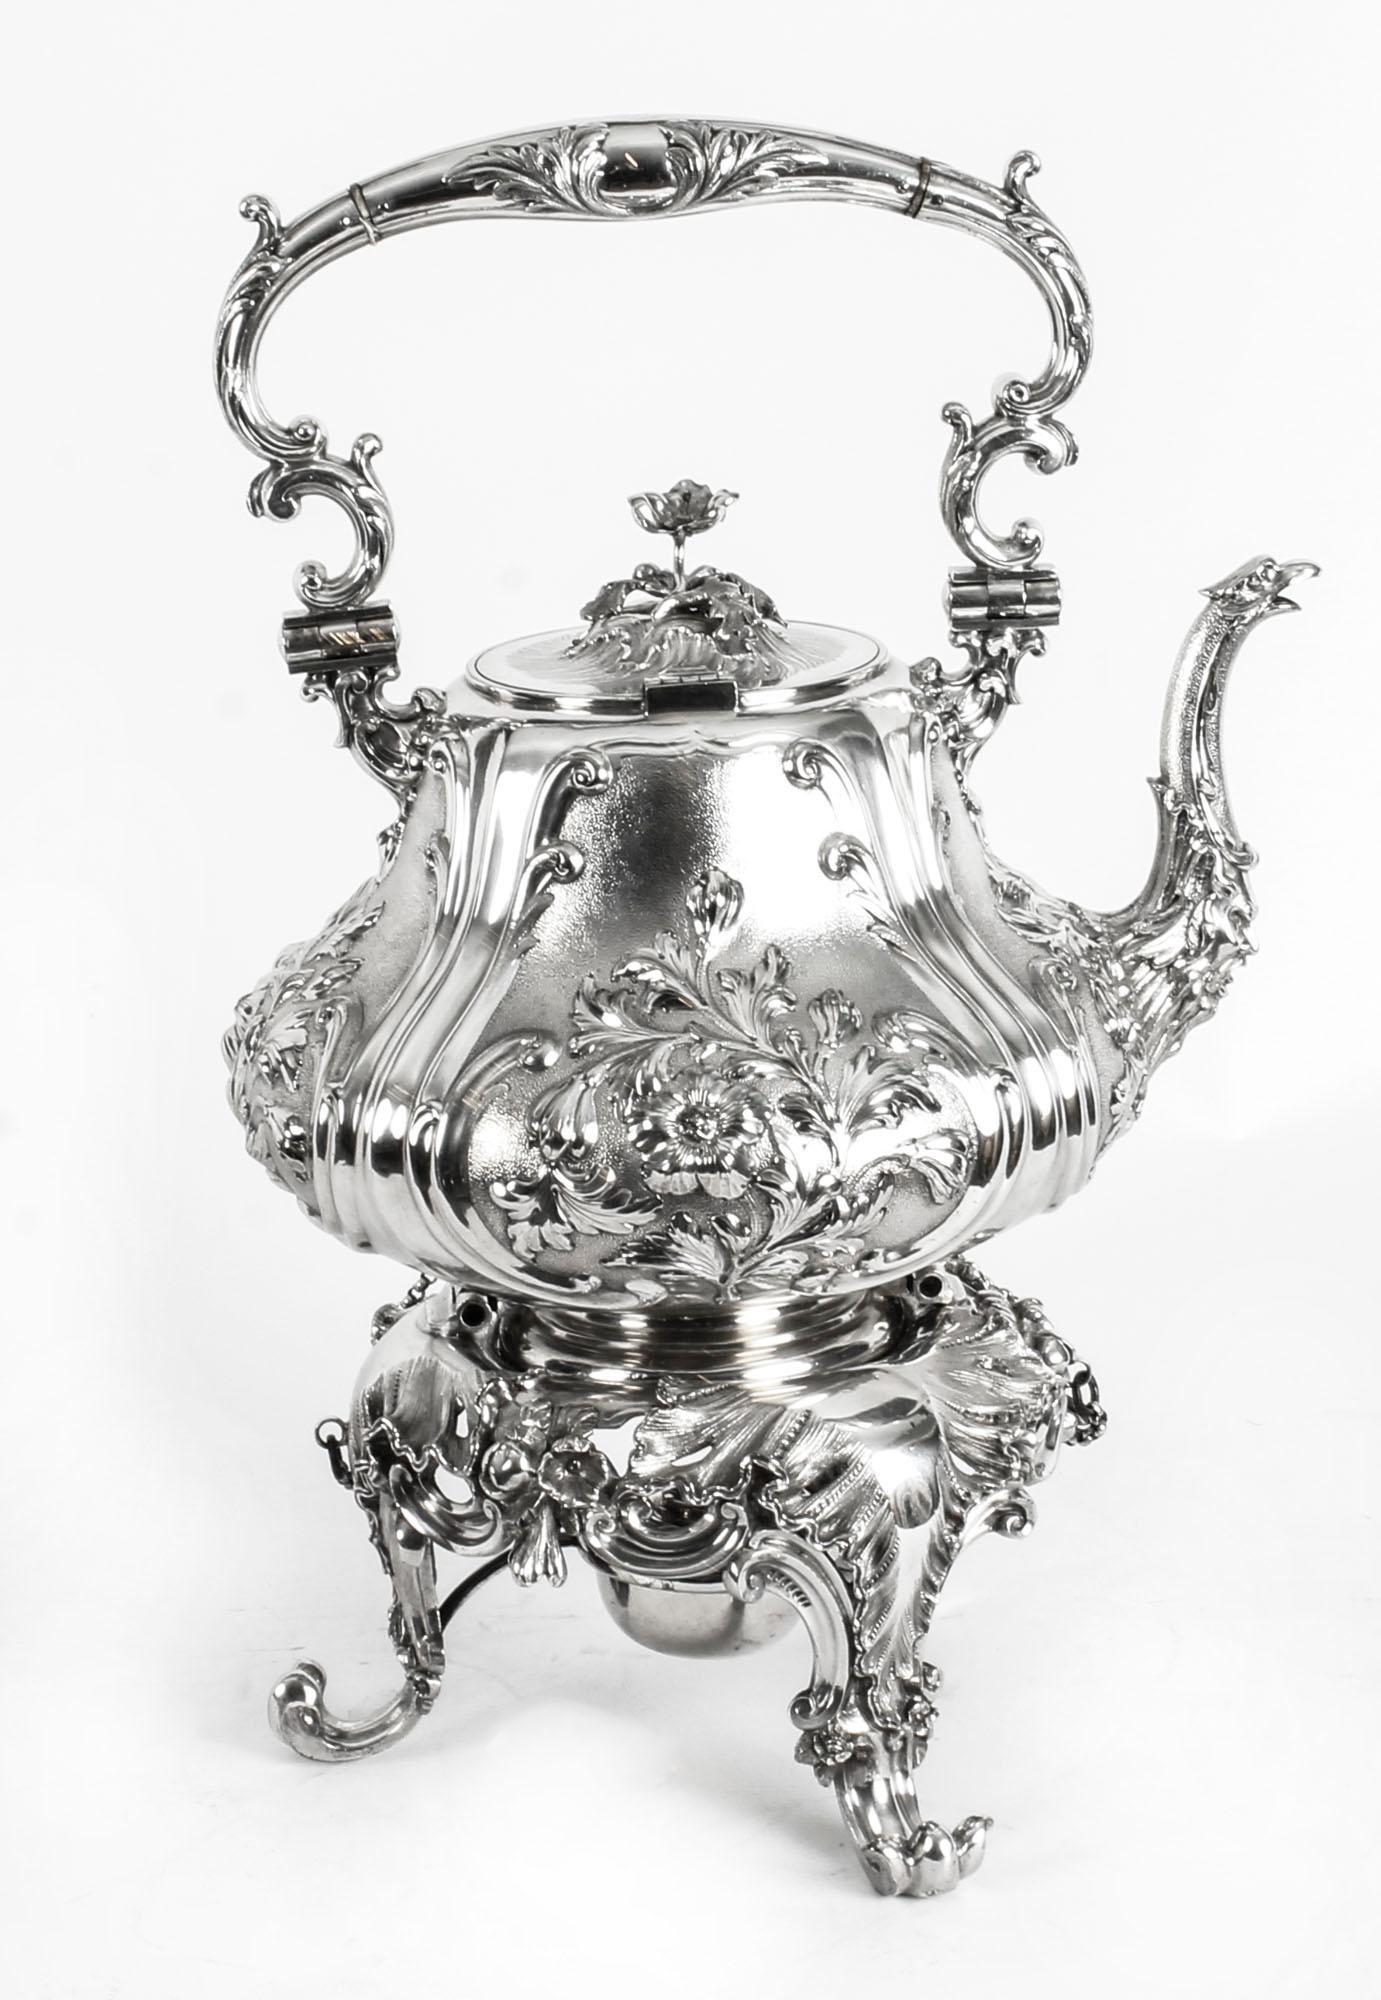 This is a stylish English antique silver plated spirit kettle on stand by the renowned silversmith Elkington & Co, circa 1860 in date.

This superb kettle has a circular shaped body with an elegant handle and a Louis spout.
 
It has beautiful